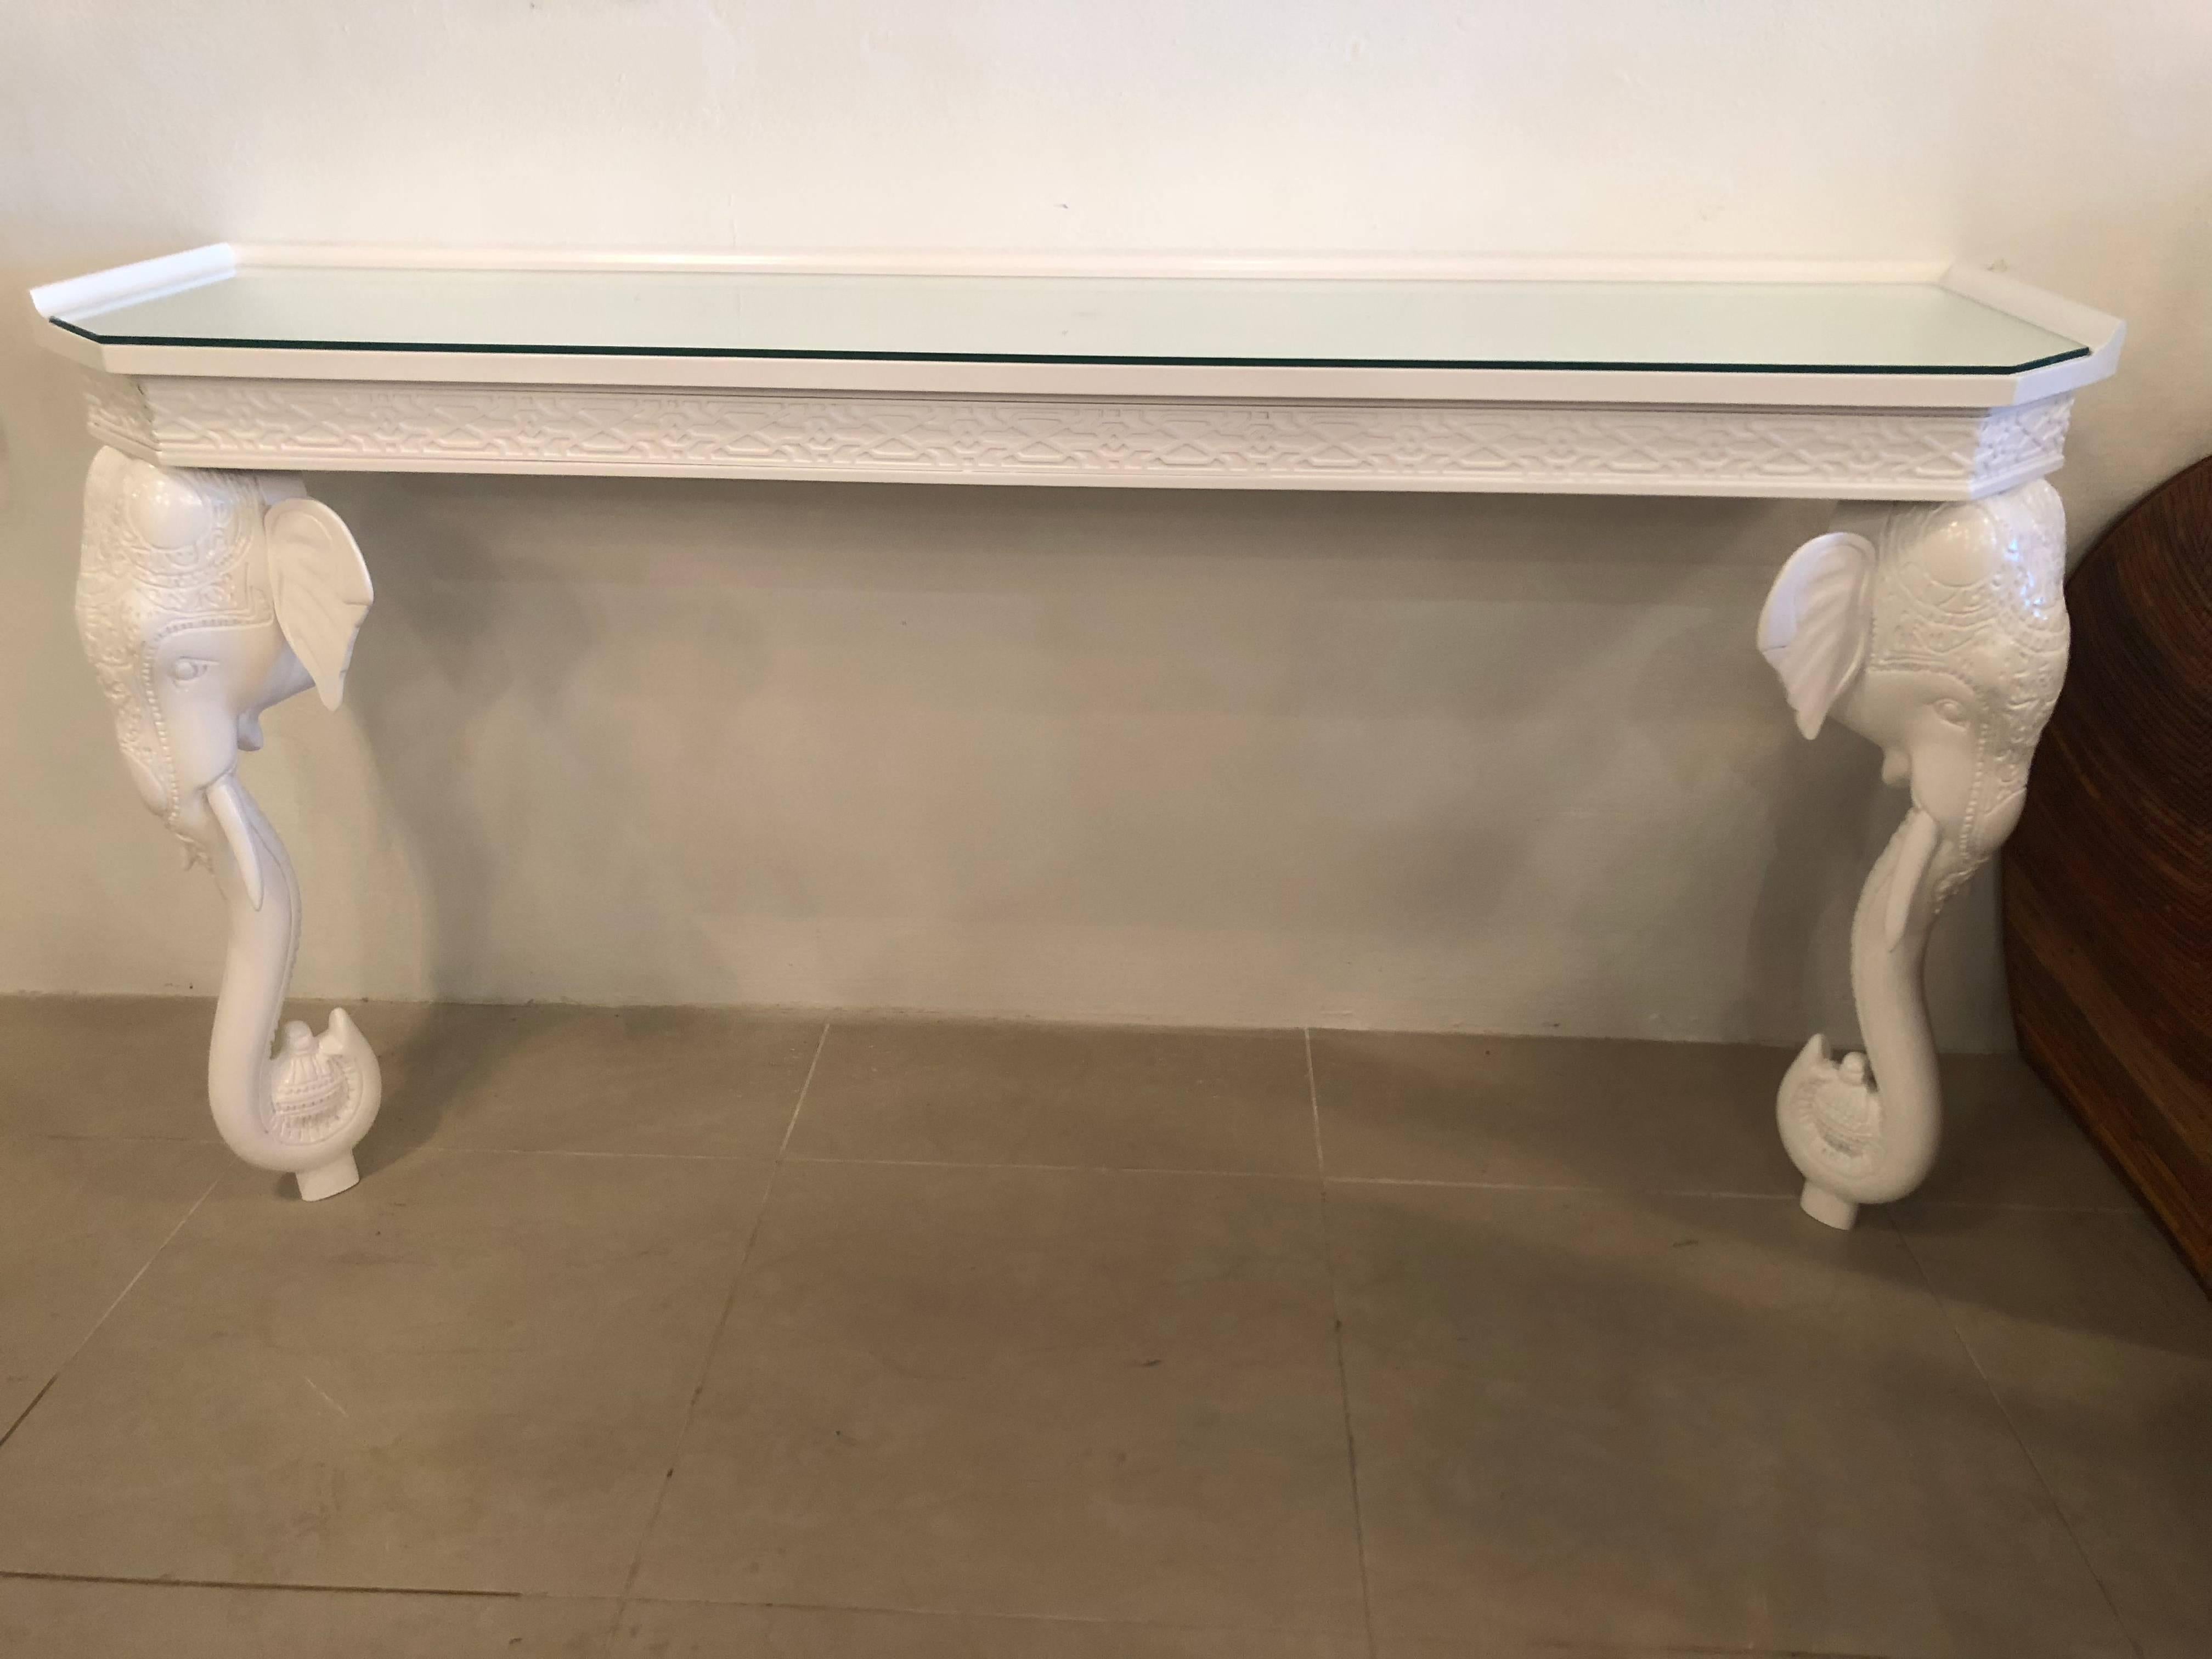 Vintage Gampel & Stoll elephant wall console table. This mounts to the wall. This has been professionally lacquered in a white gloss. This has a removable glass top. Fret work details.